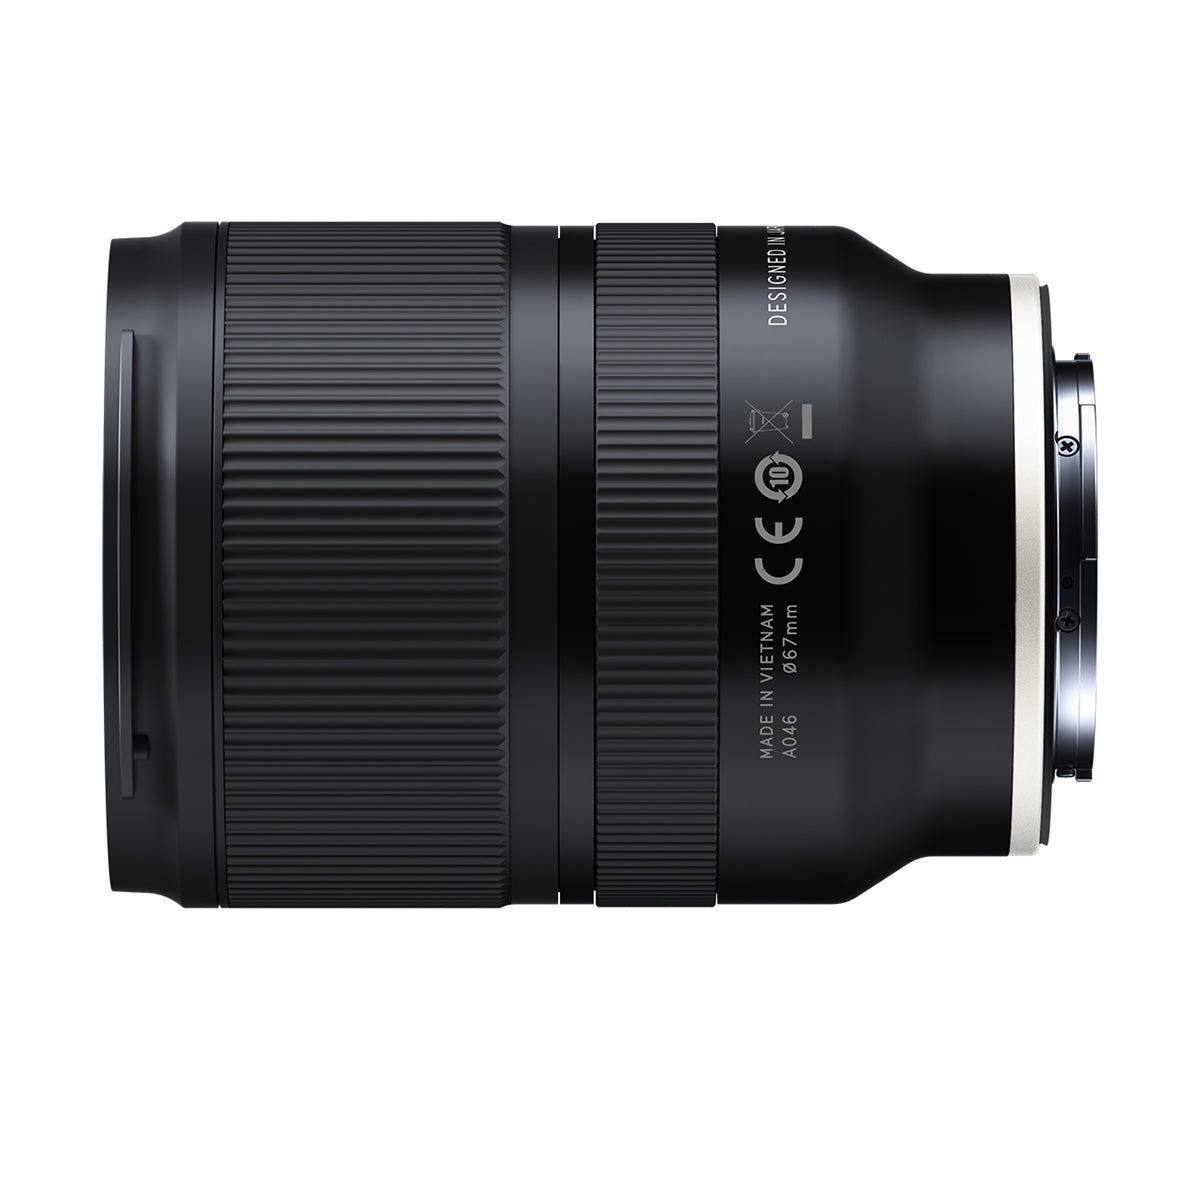 Tamron 17-28mm f/2.8 Di III RXD Lens for Sony FE